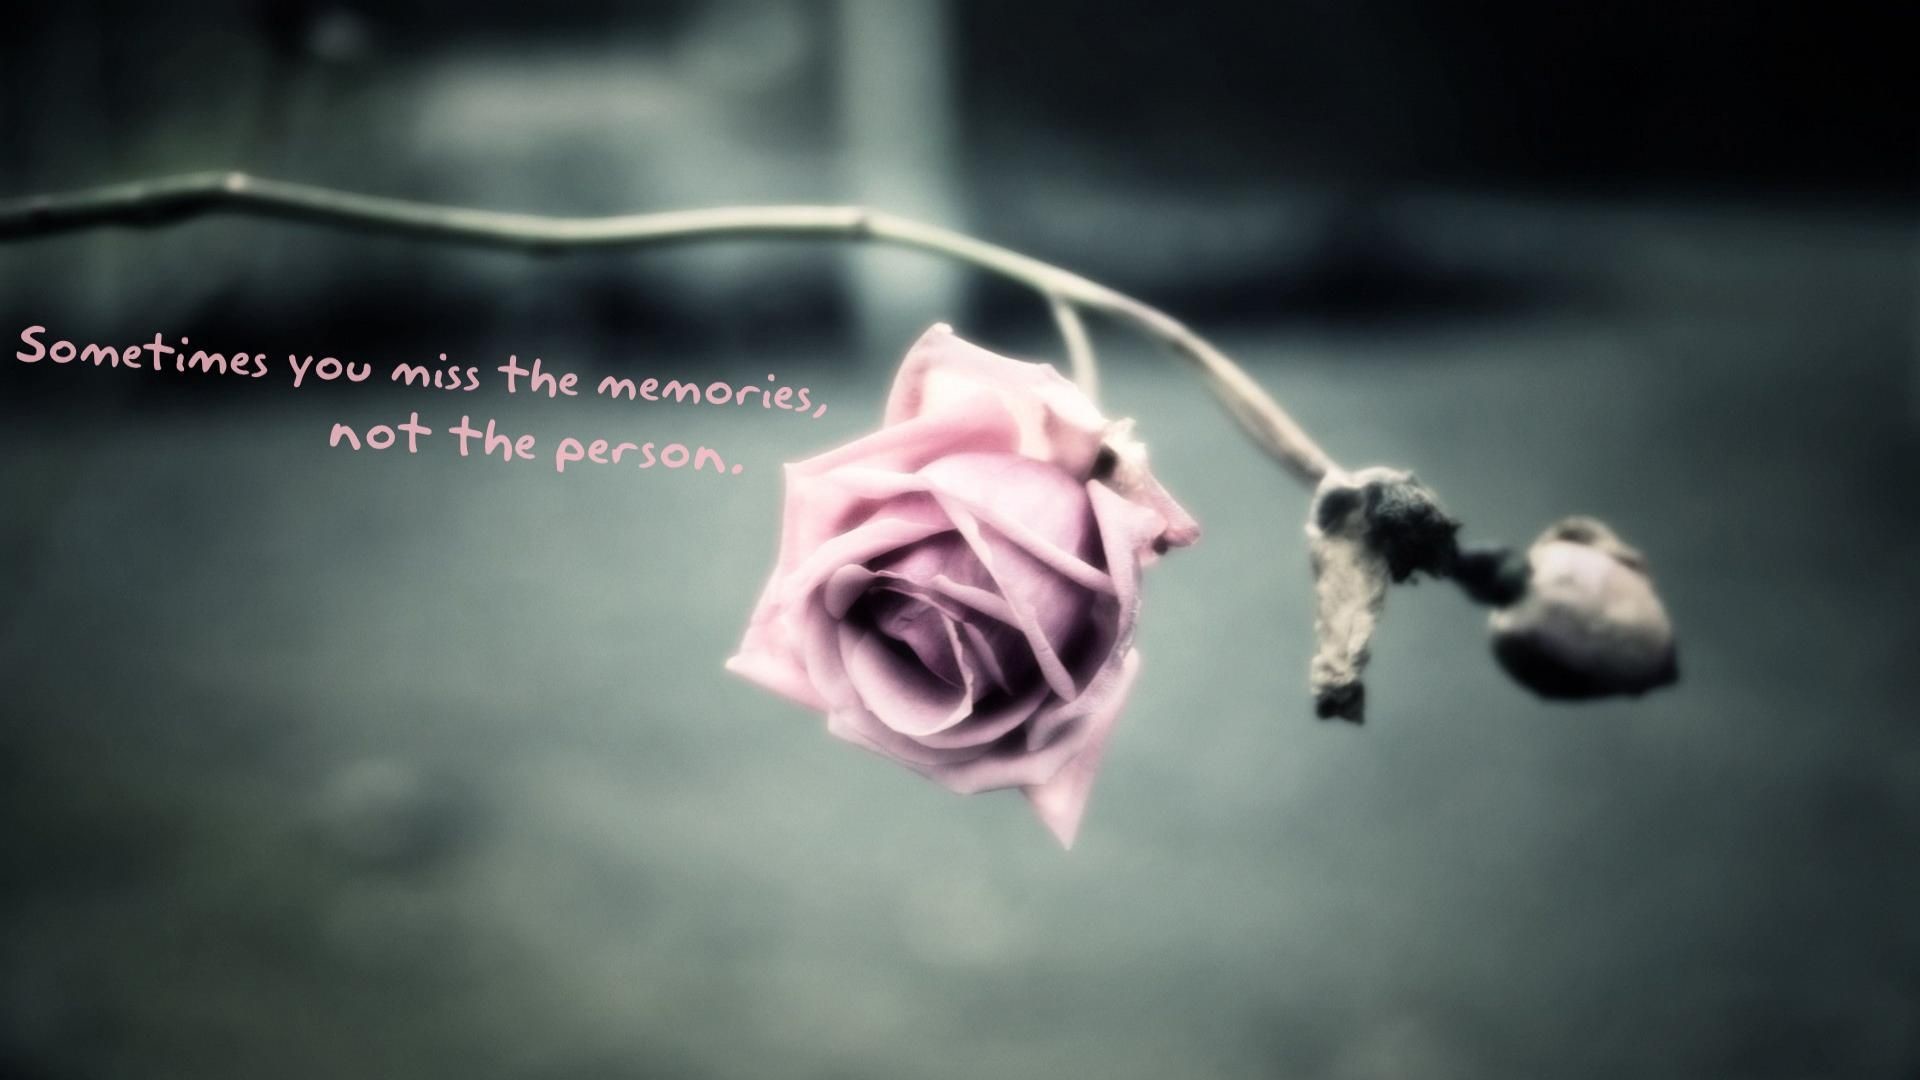 1920x1080 Image for Quotes About Love Cover Photo Cool Wallpapers